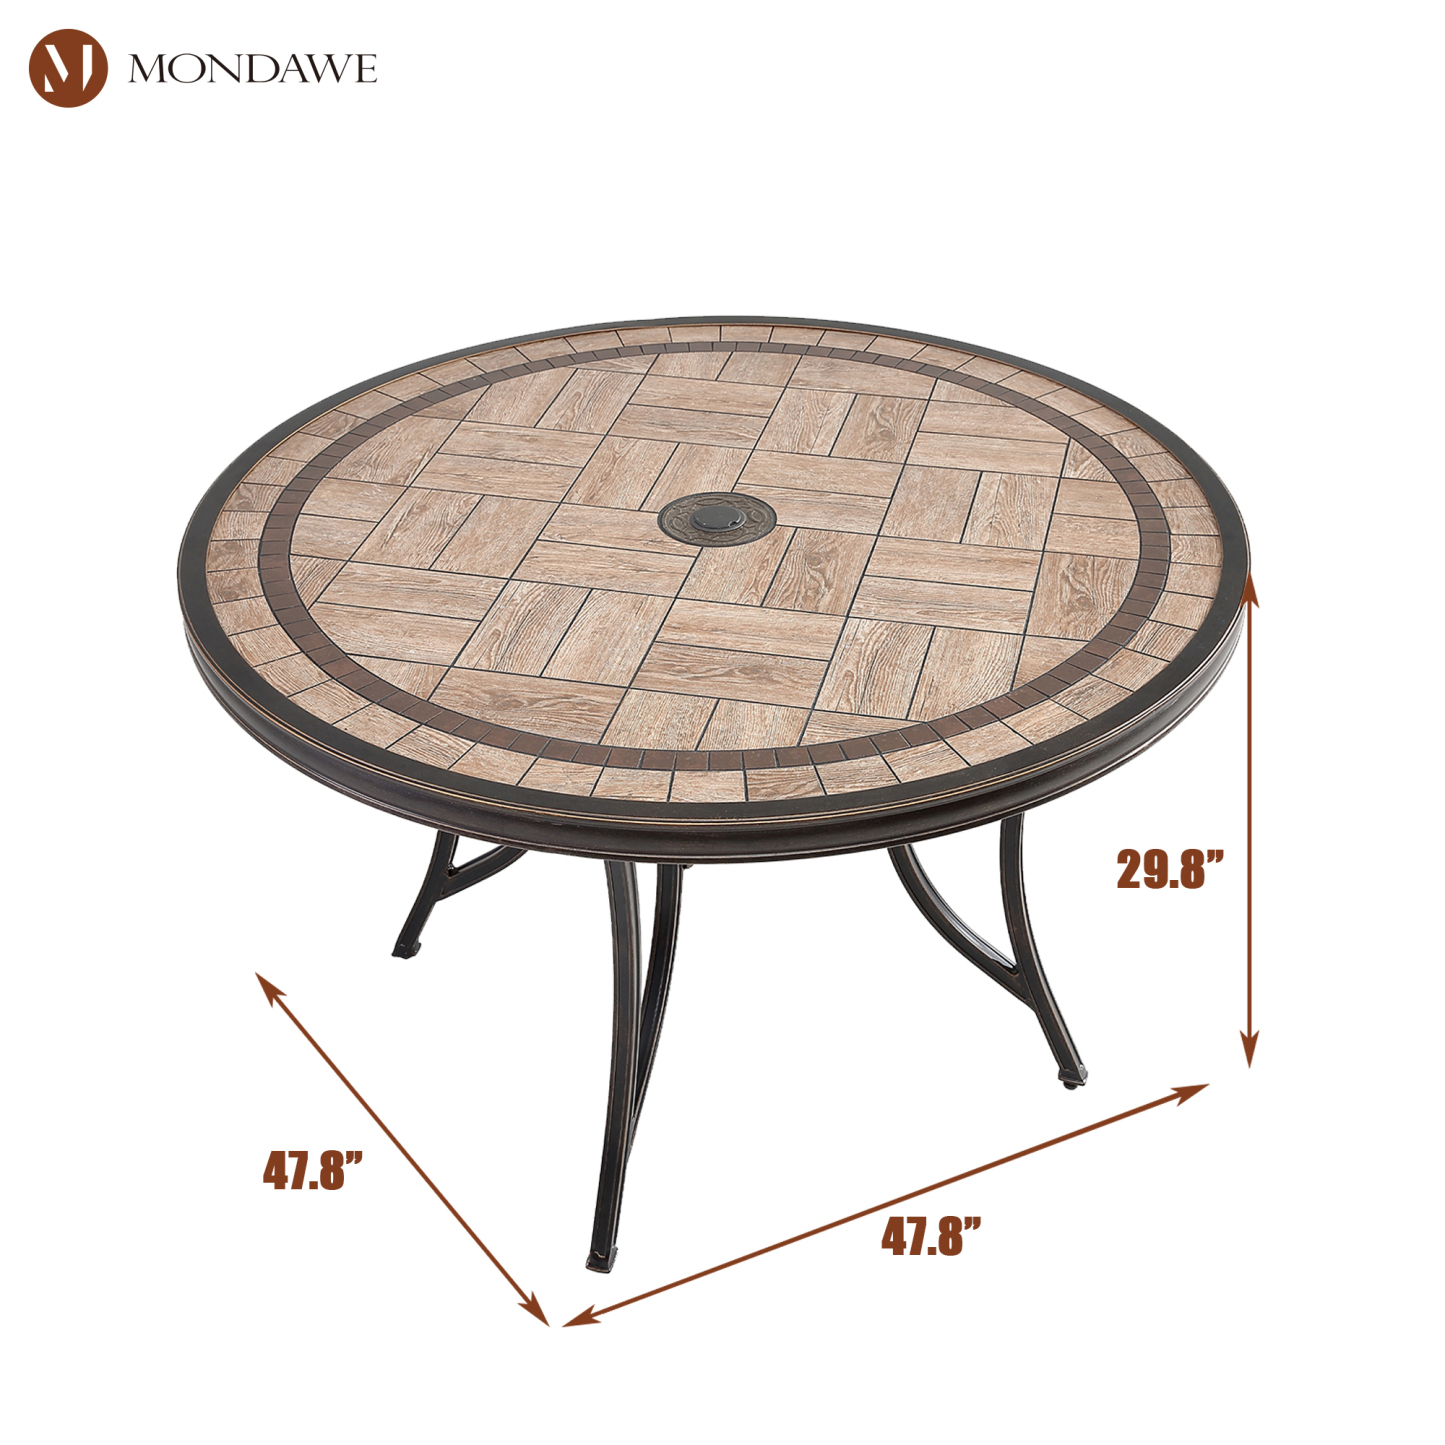 Mondawe 48-In Patio Round Tile-Top Dining Table with Umbrella Hole